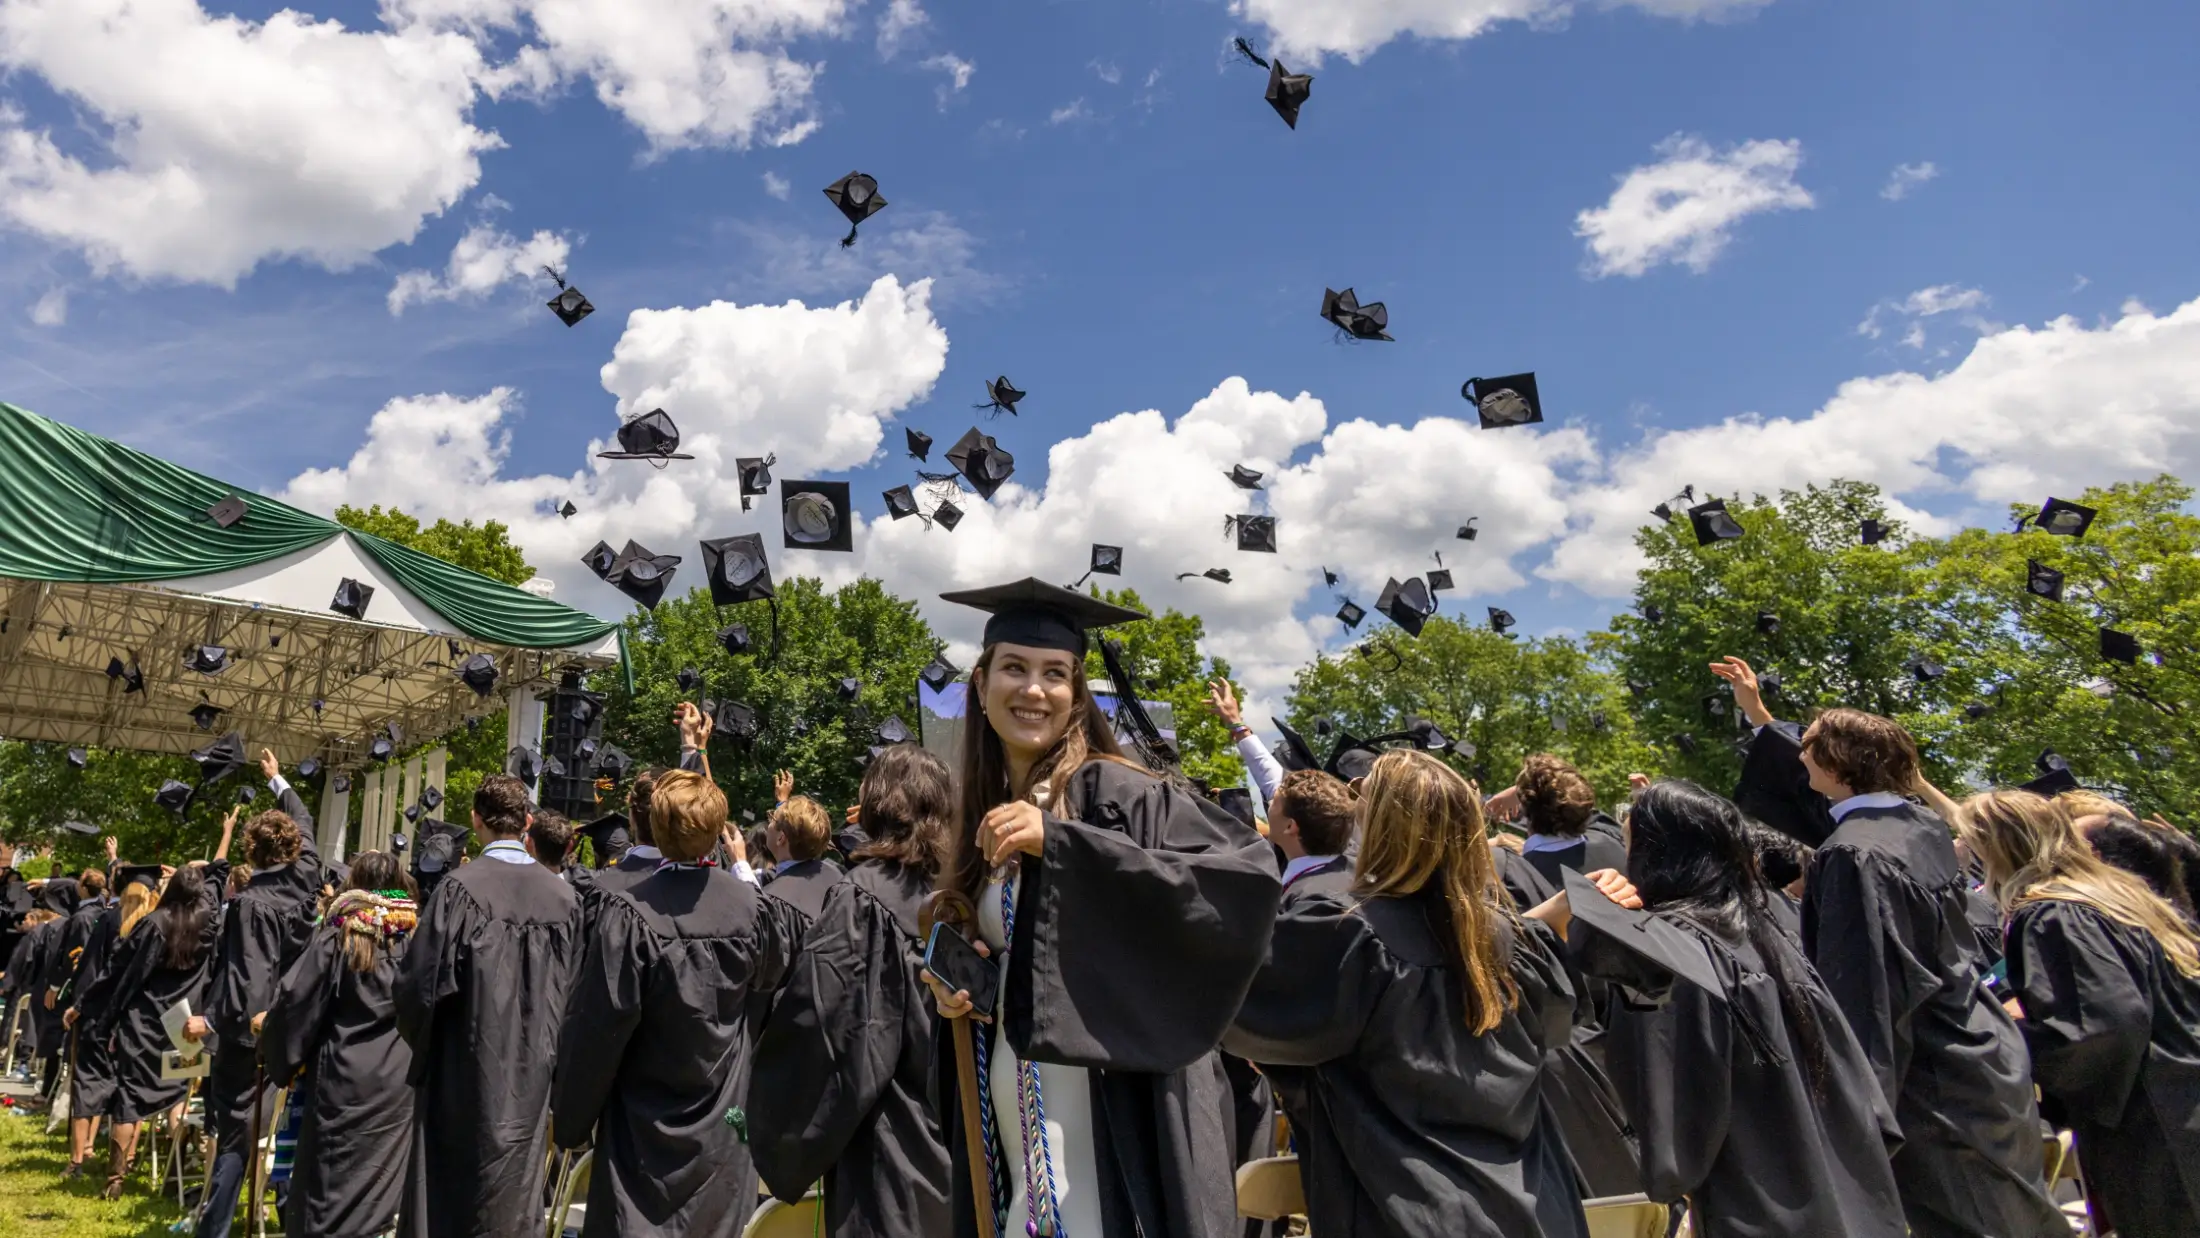 Dartmouth College graduates celebratory cap throw on the Green in Hanover New Hampshire.